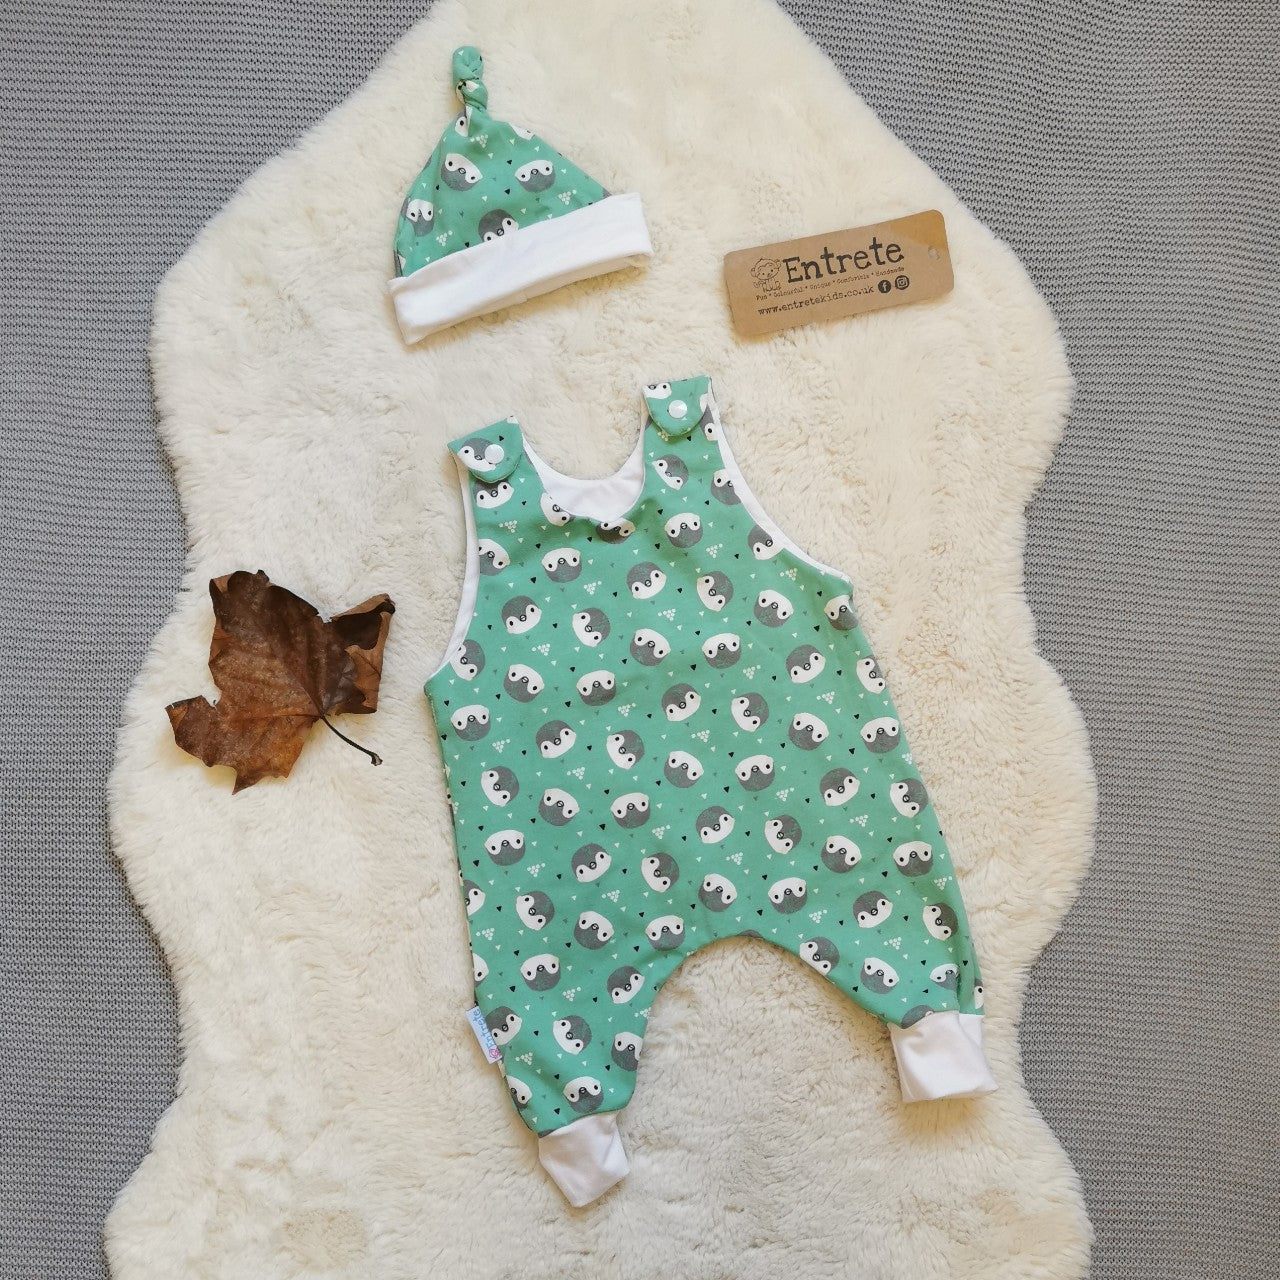 Romper gift set, shown in mint penguins cotton jersey for demonstration purposes only. Yours will be handmade using turquoise boom pow wow cotton jersey.